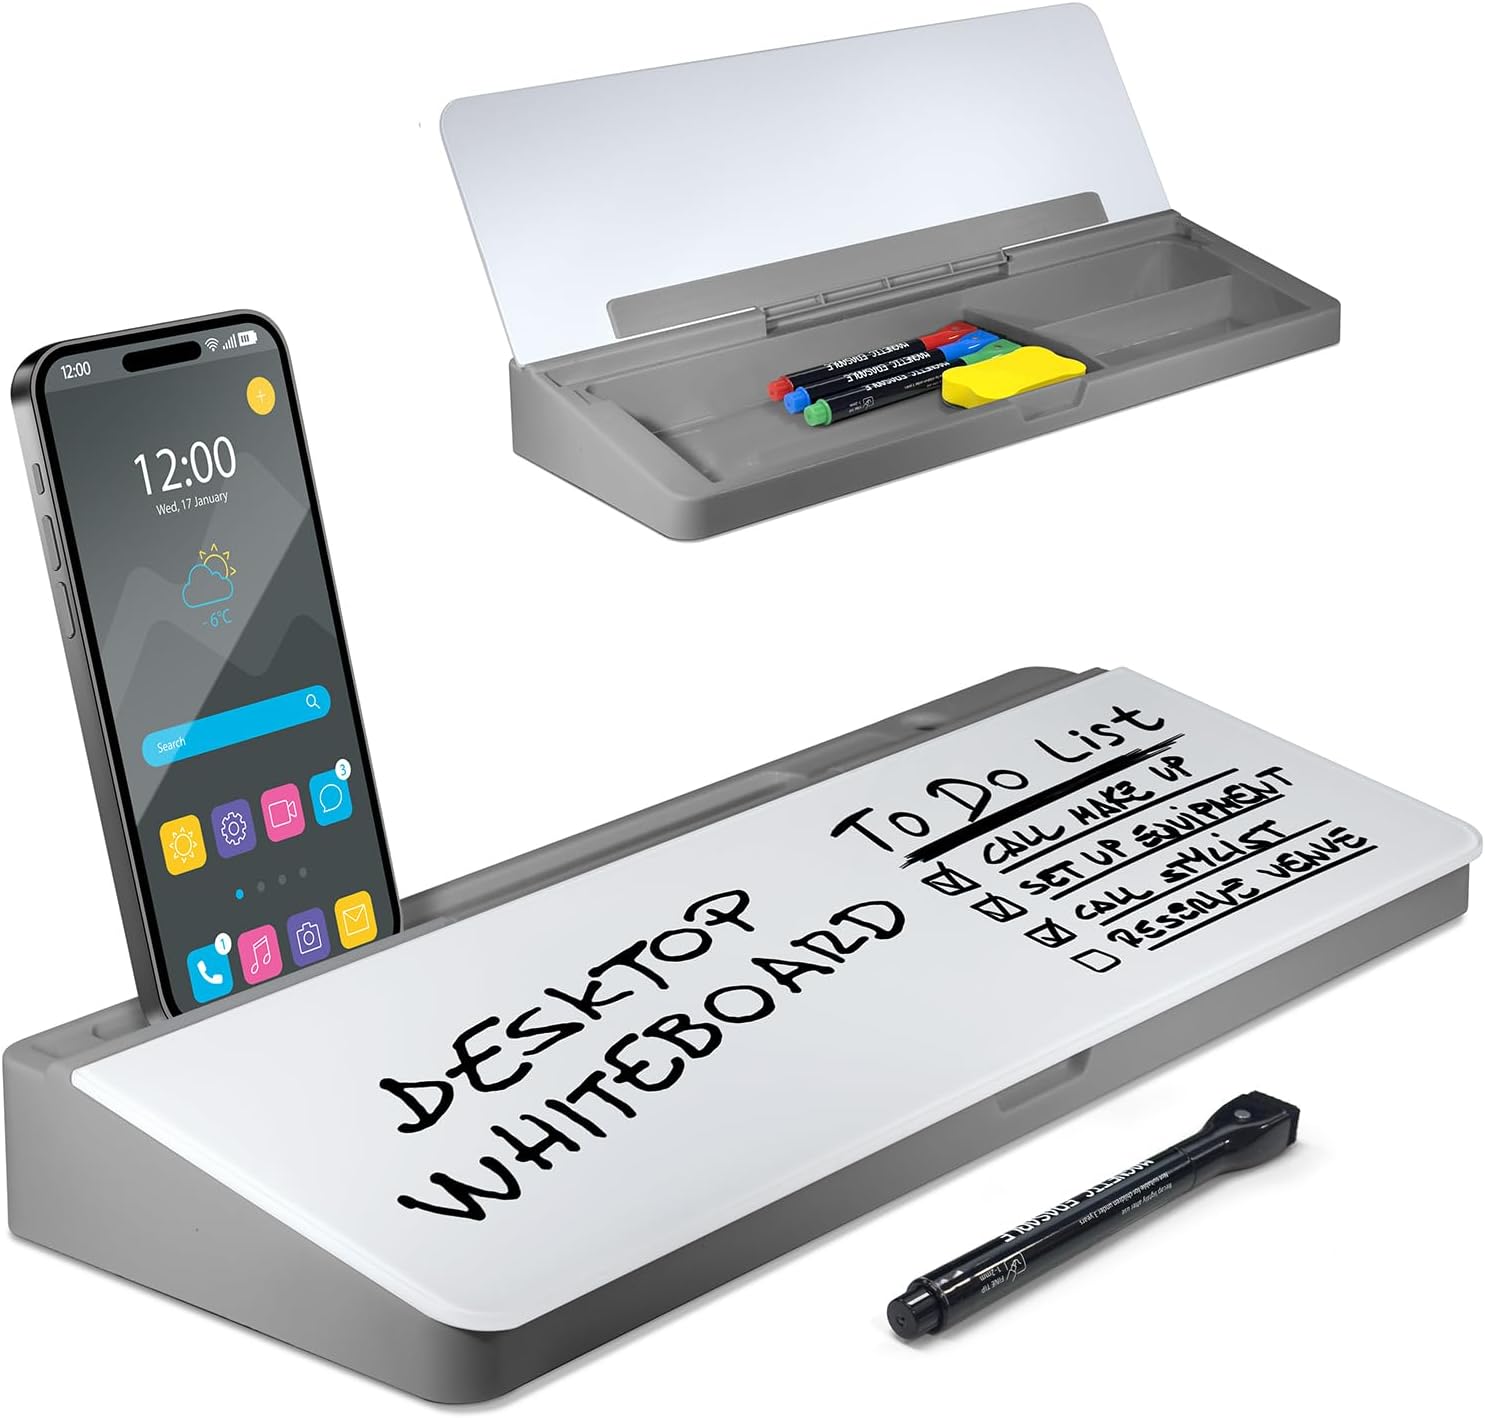 SHOP SQUARE Desktop Whiteboard With Phone Holder - Glass Dry Erase Whiteboard - Markers Included https://geeksempire.co/products-editors-choice/office-gadgets-products/desktop-whiteboard-with-phone-holder-glass-dry-erase-whiteboard-markers-included/